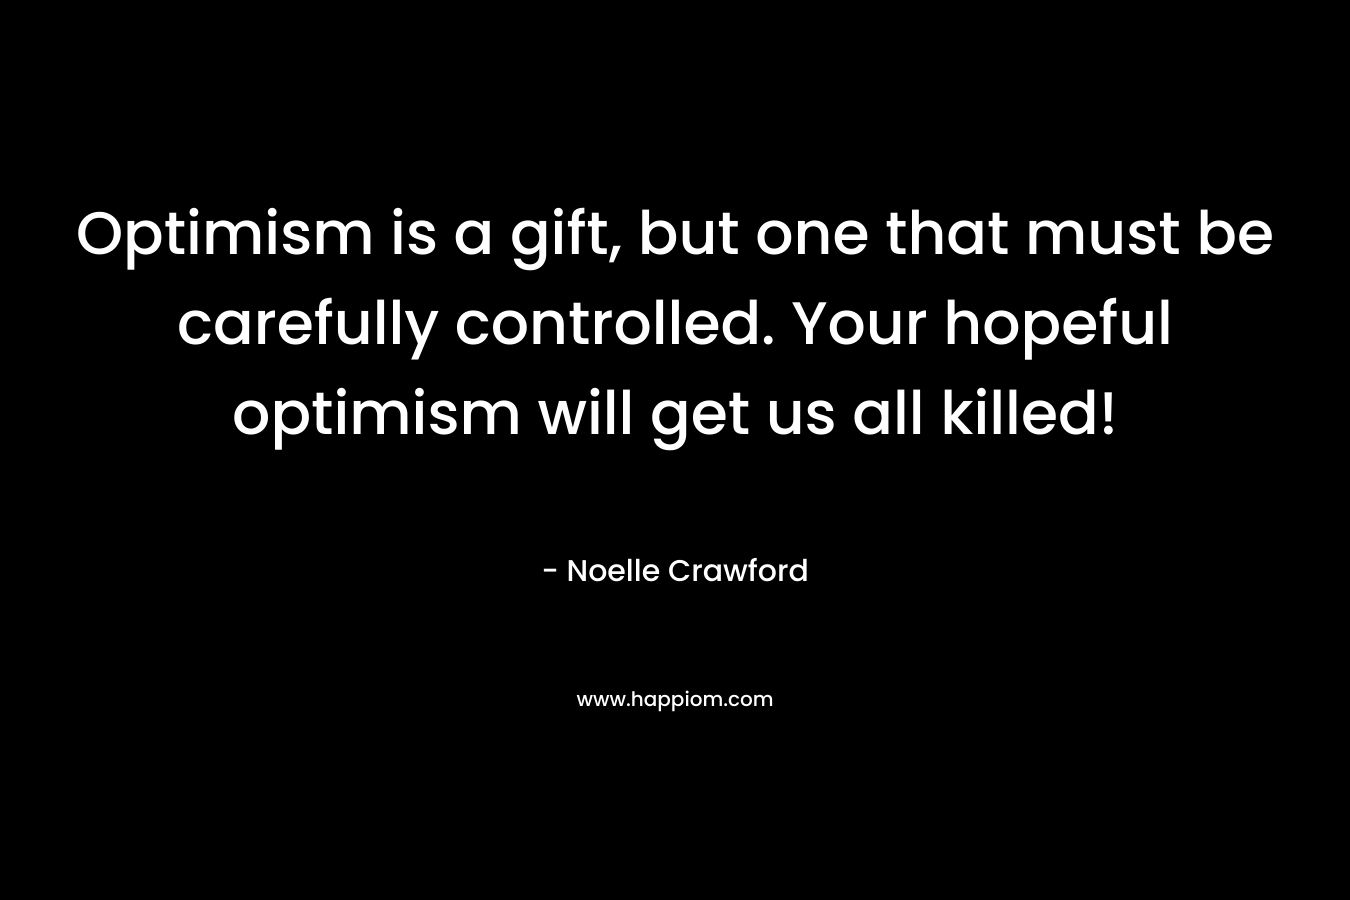 Optimism is a gift, but one that must be carefully controlled. Your hopeful optimism will get us all killed! – Noelle Crawford